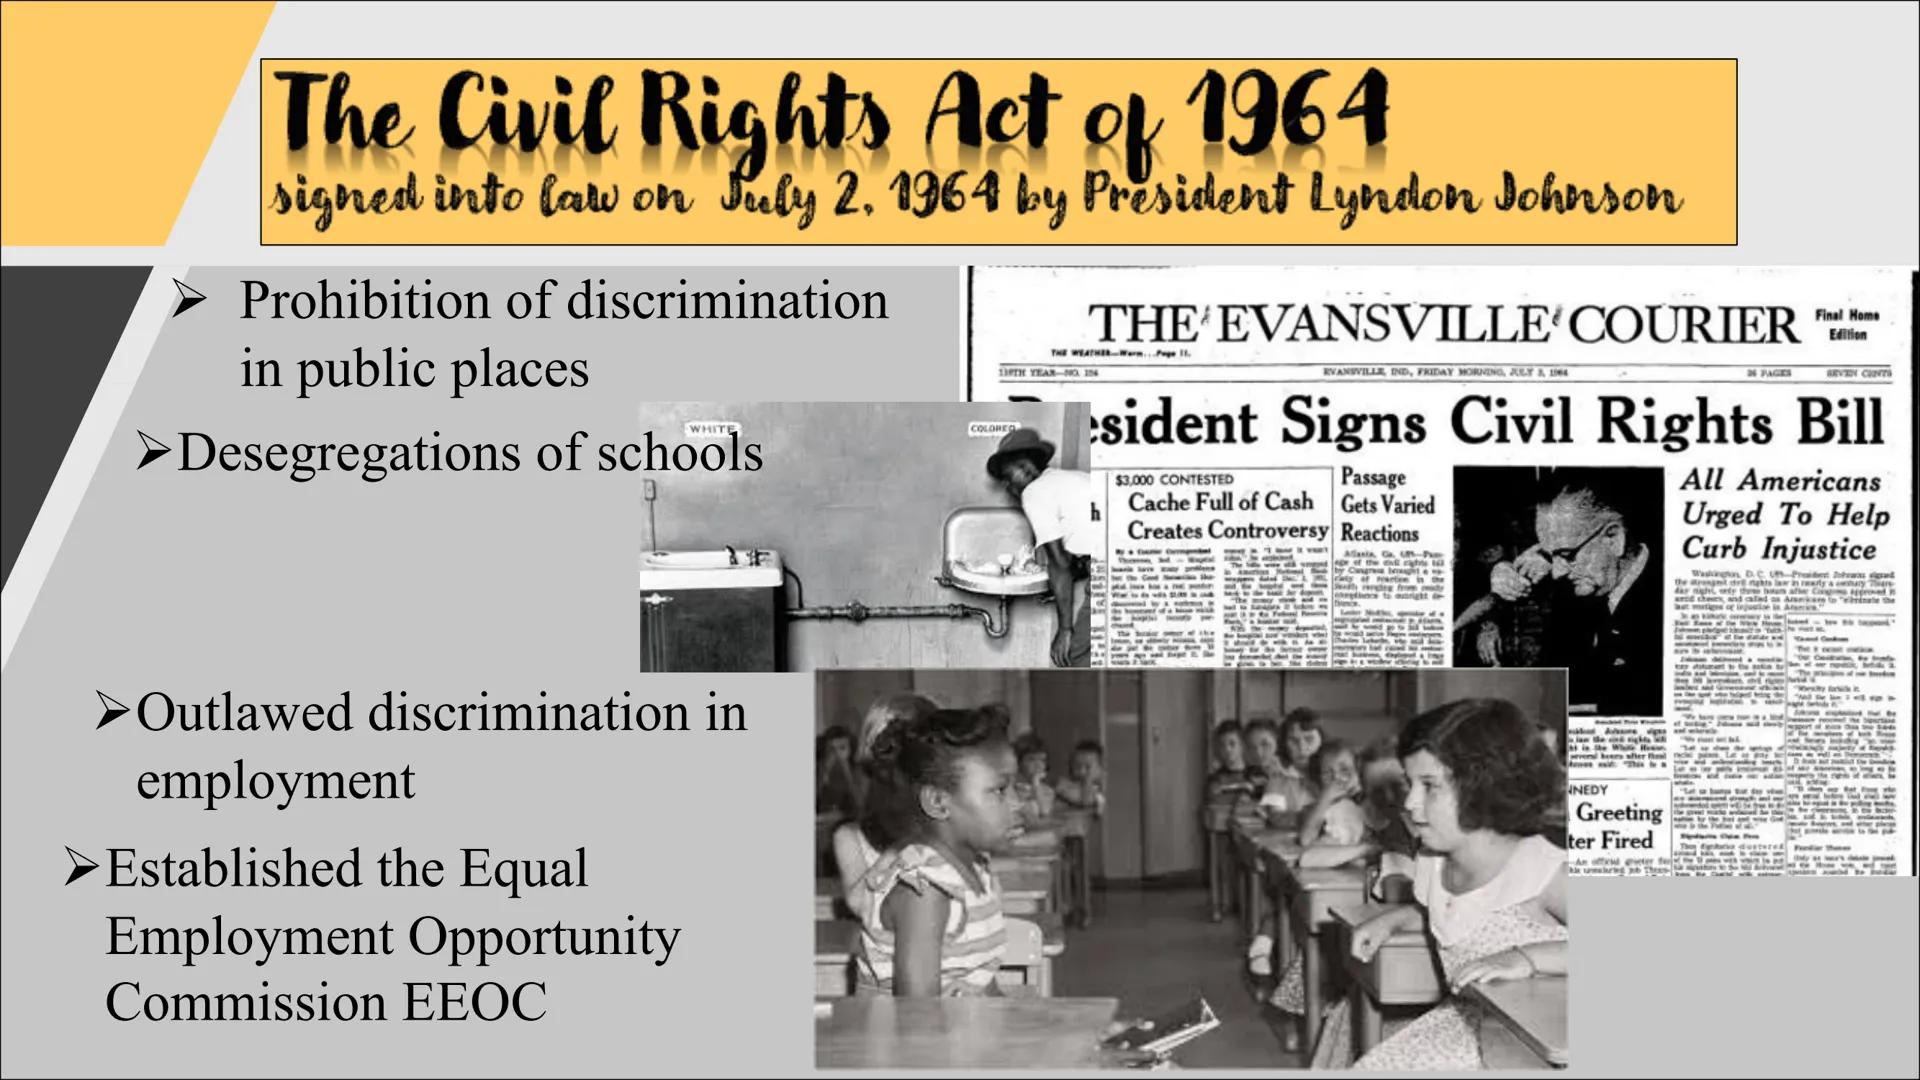 civil rights movement
The struggle for equality
Life before the movement
▶ Abolishment of slavery after the Civil War
▸ Discrimination and r